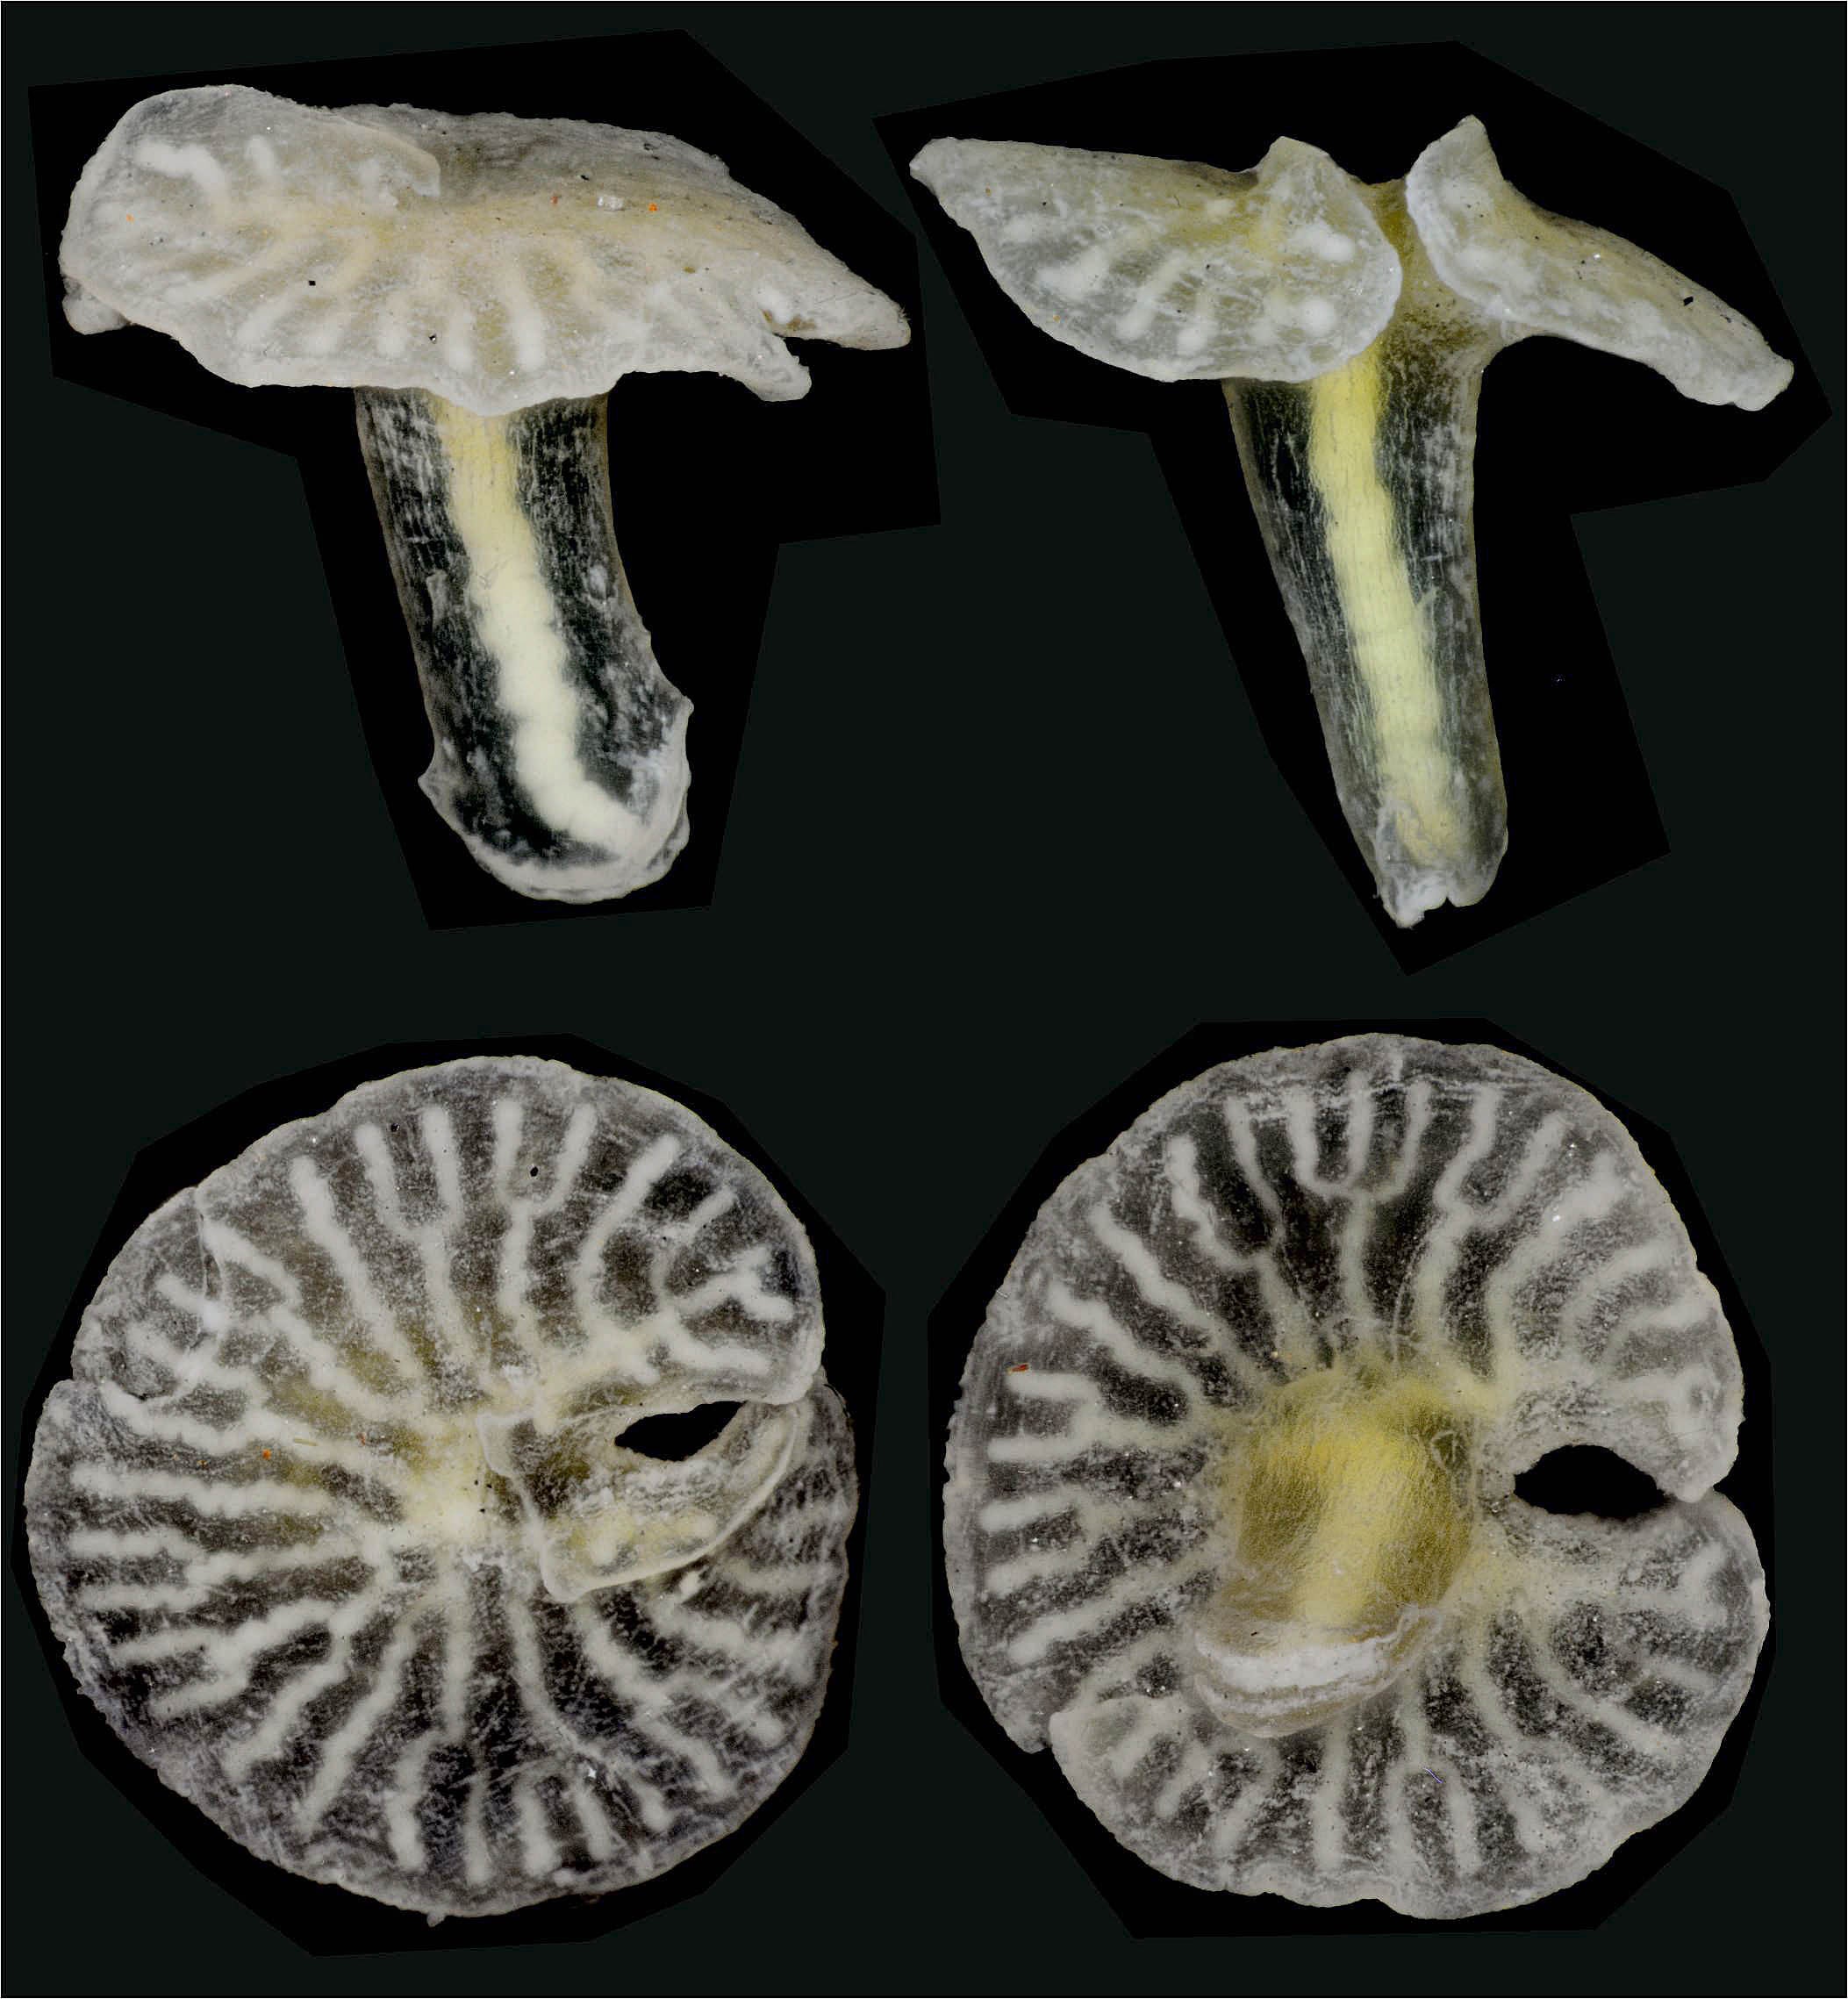 Researchers have named a new genus of mushroom-shaped animal